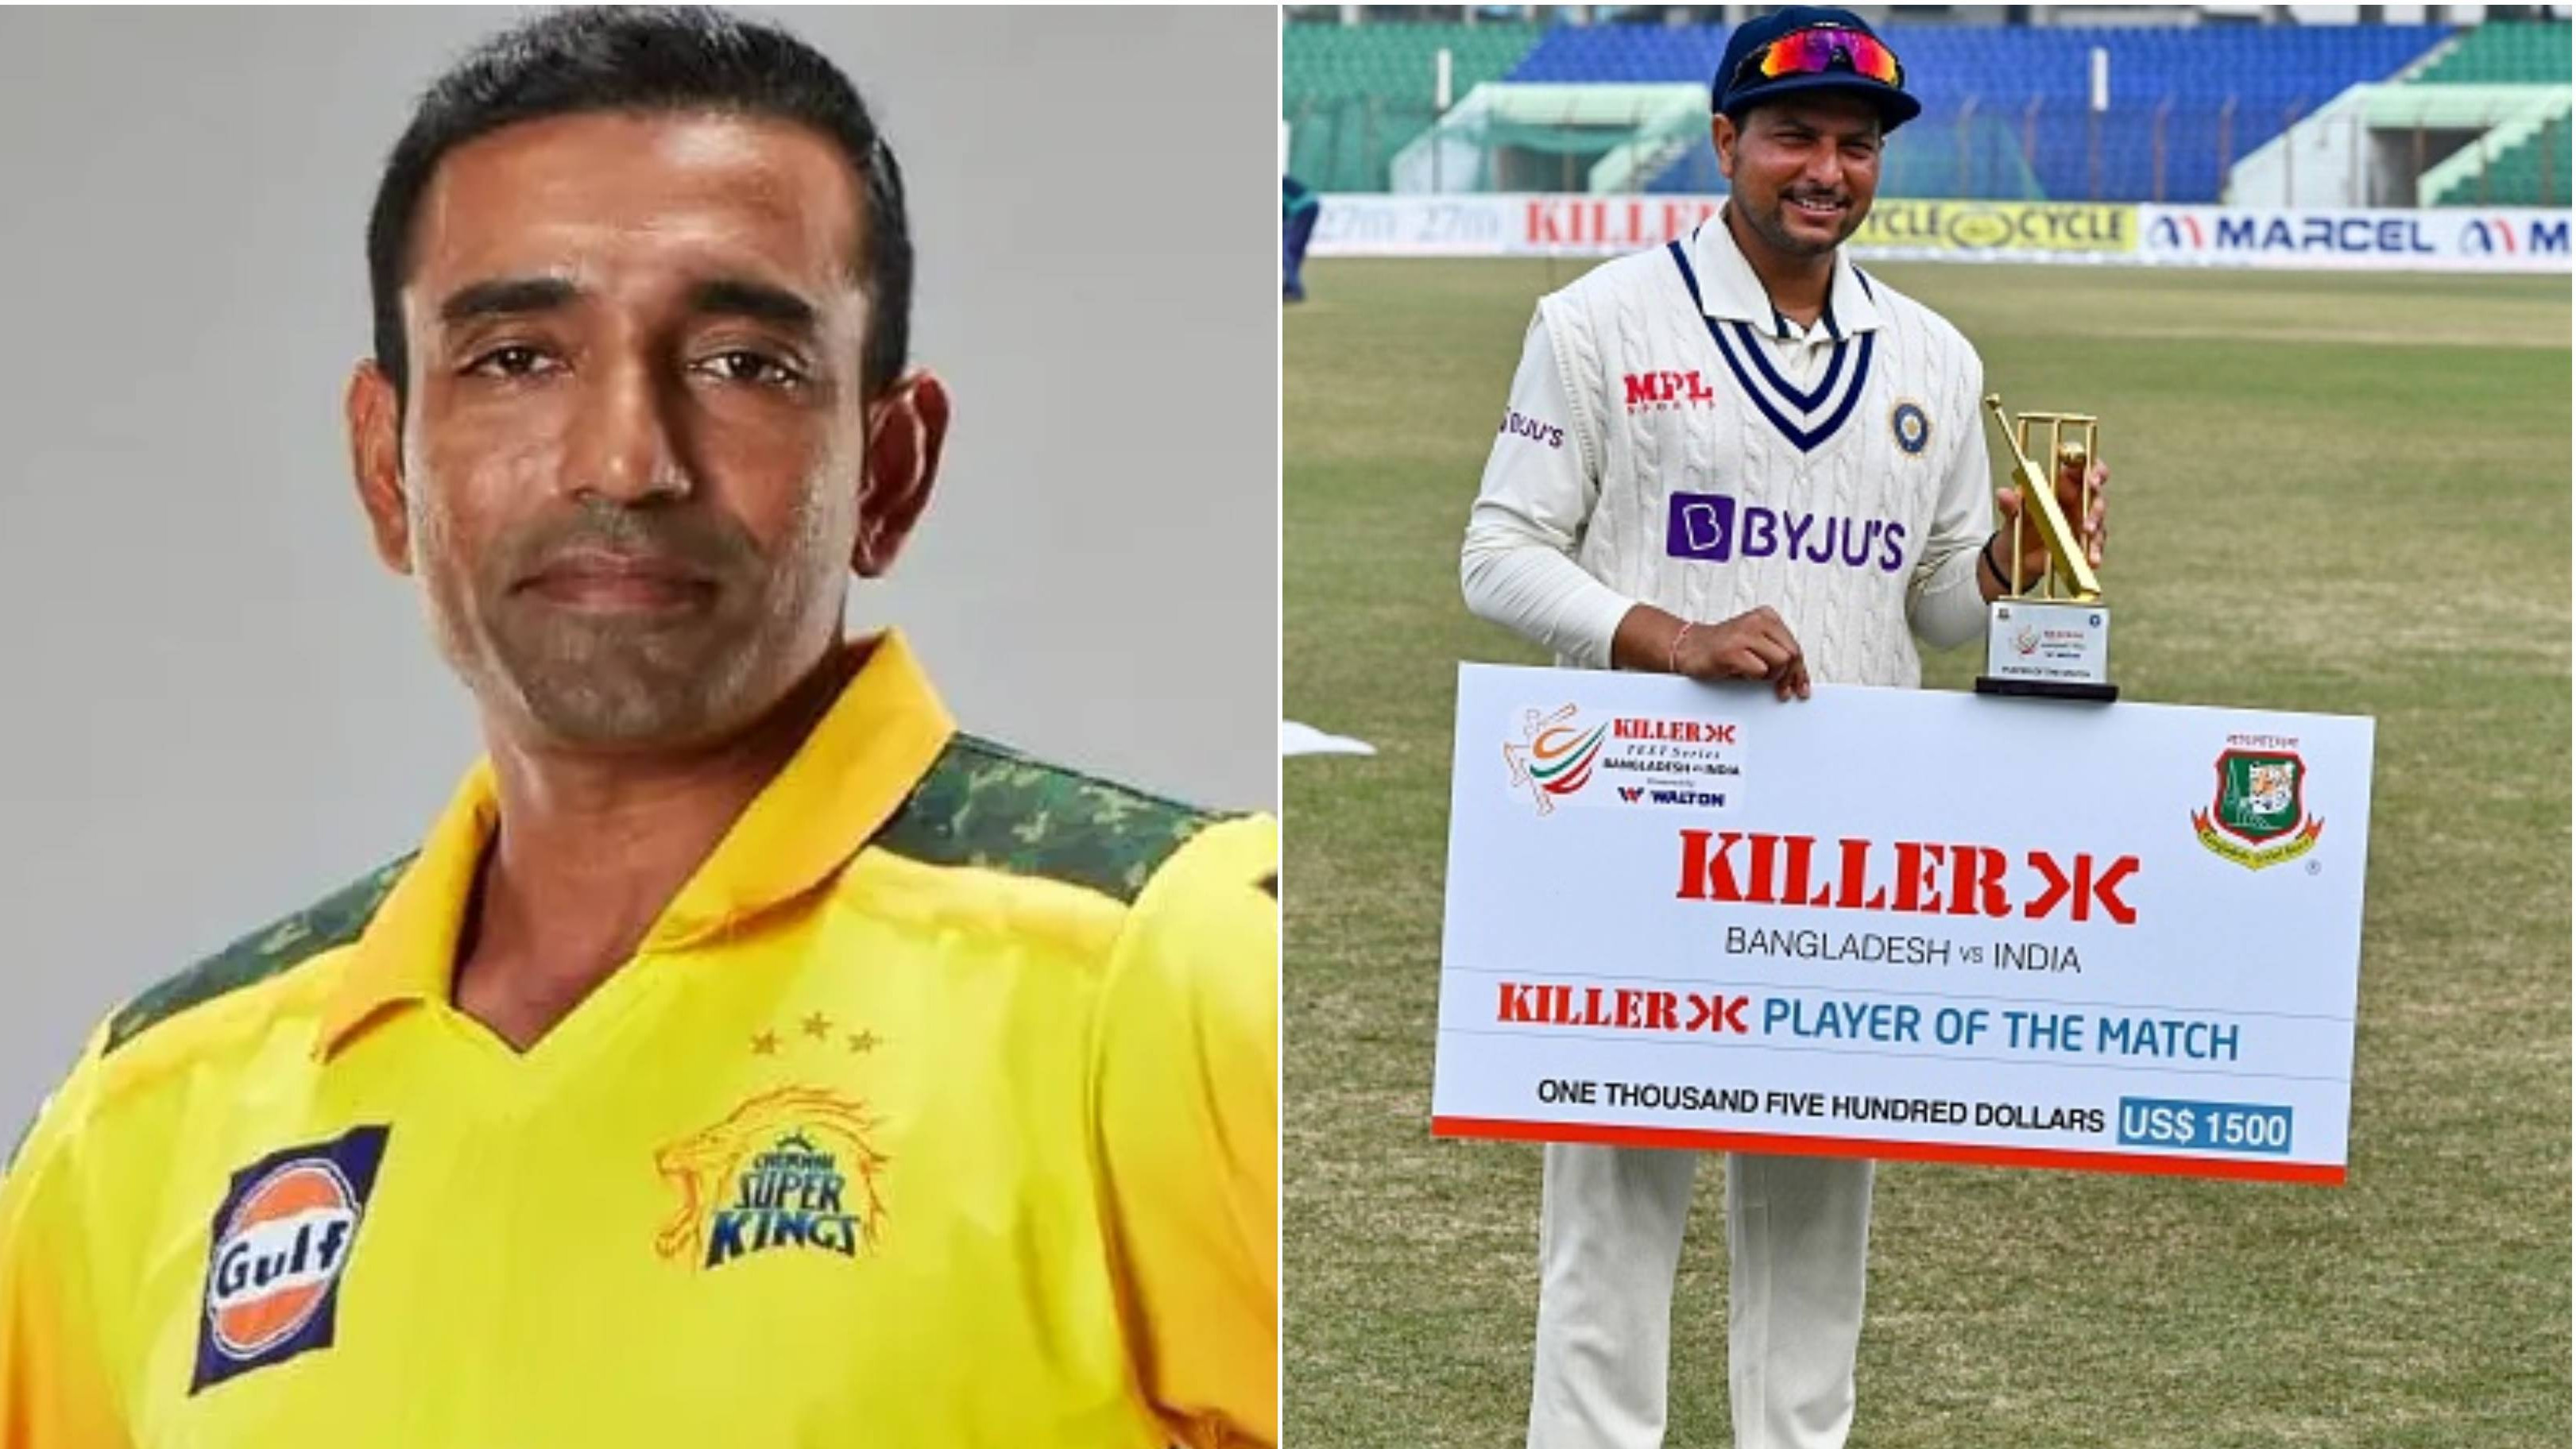 “There is a lack of sense of security among players,” Robin Uthappa on India’s poor show in ICC events